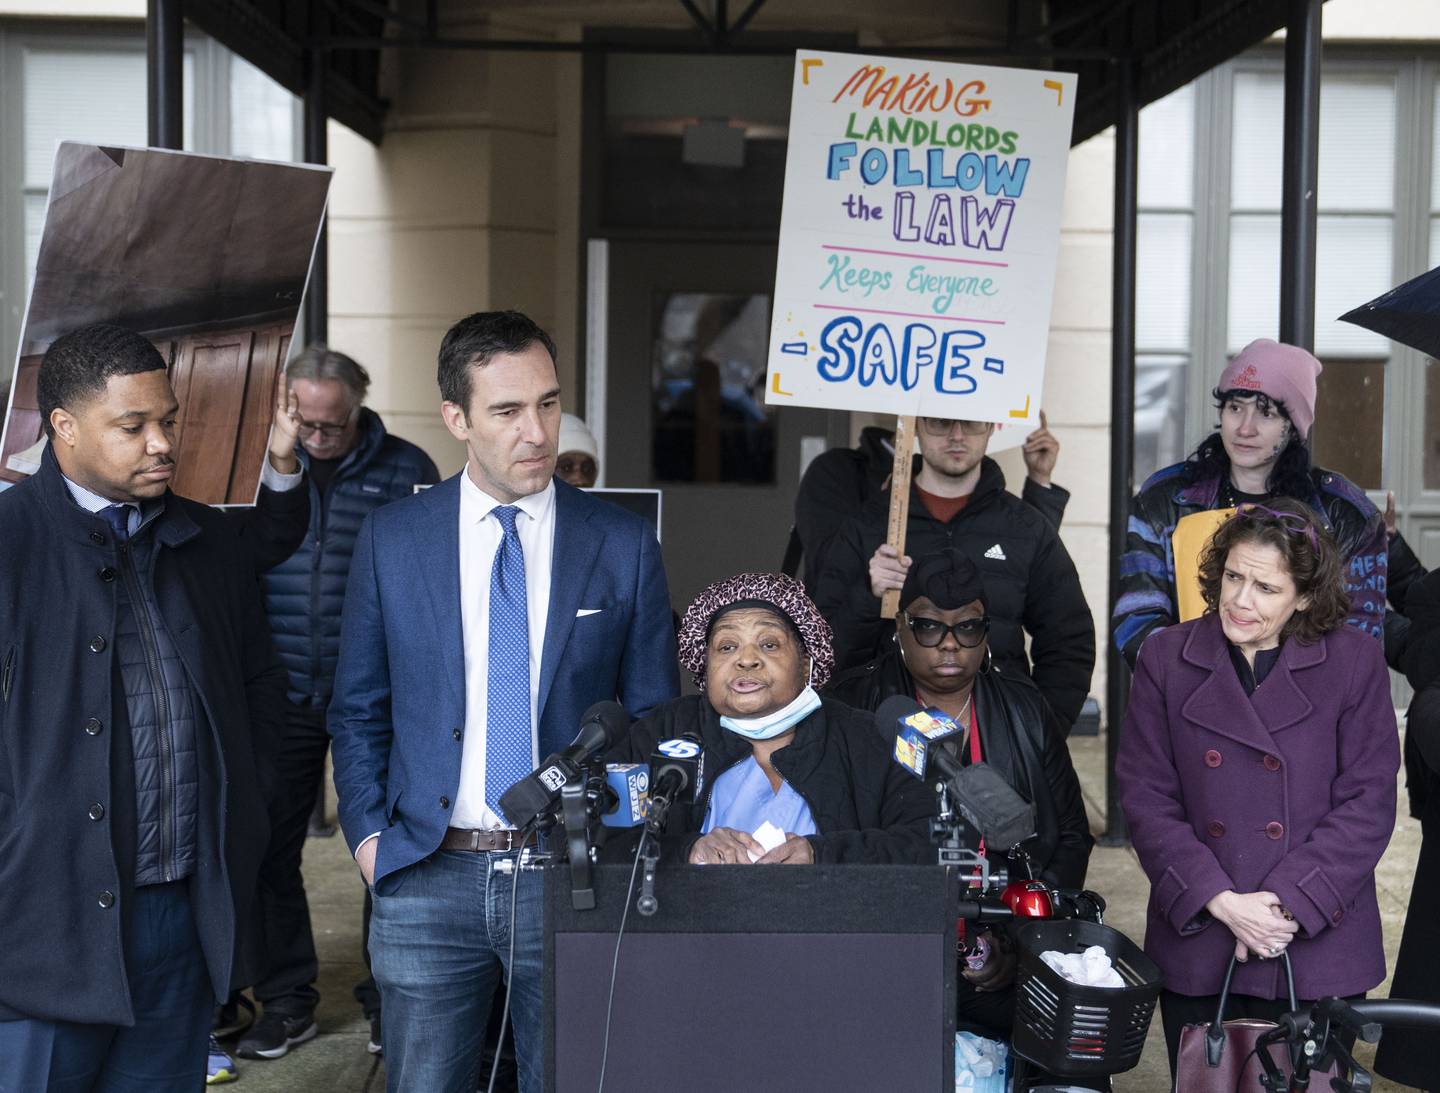 Elaine Nichols speaks alongside a coalition of renters demanding strengthened accountability for the City’s most frequently cited and hazardous multi-family dwellings, in Baltimore, Monday, February 27, 2023.